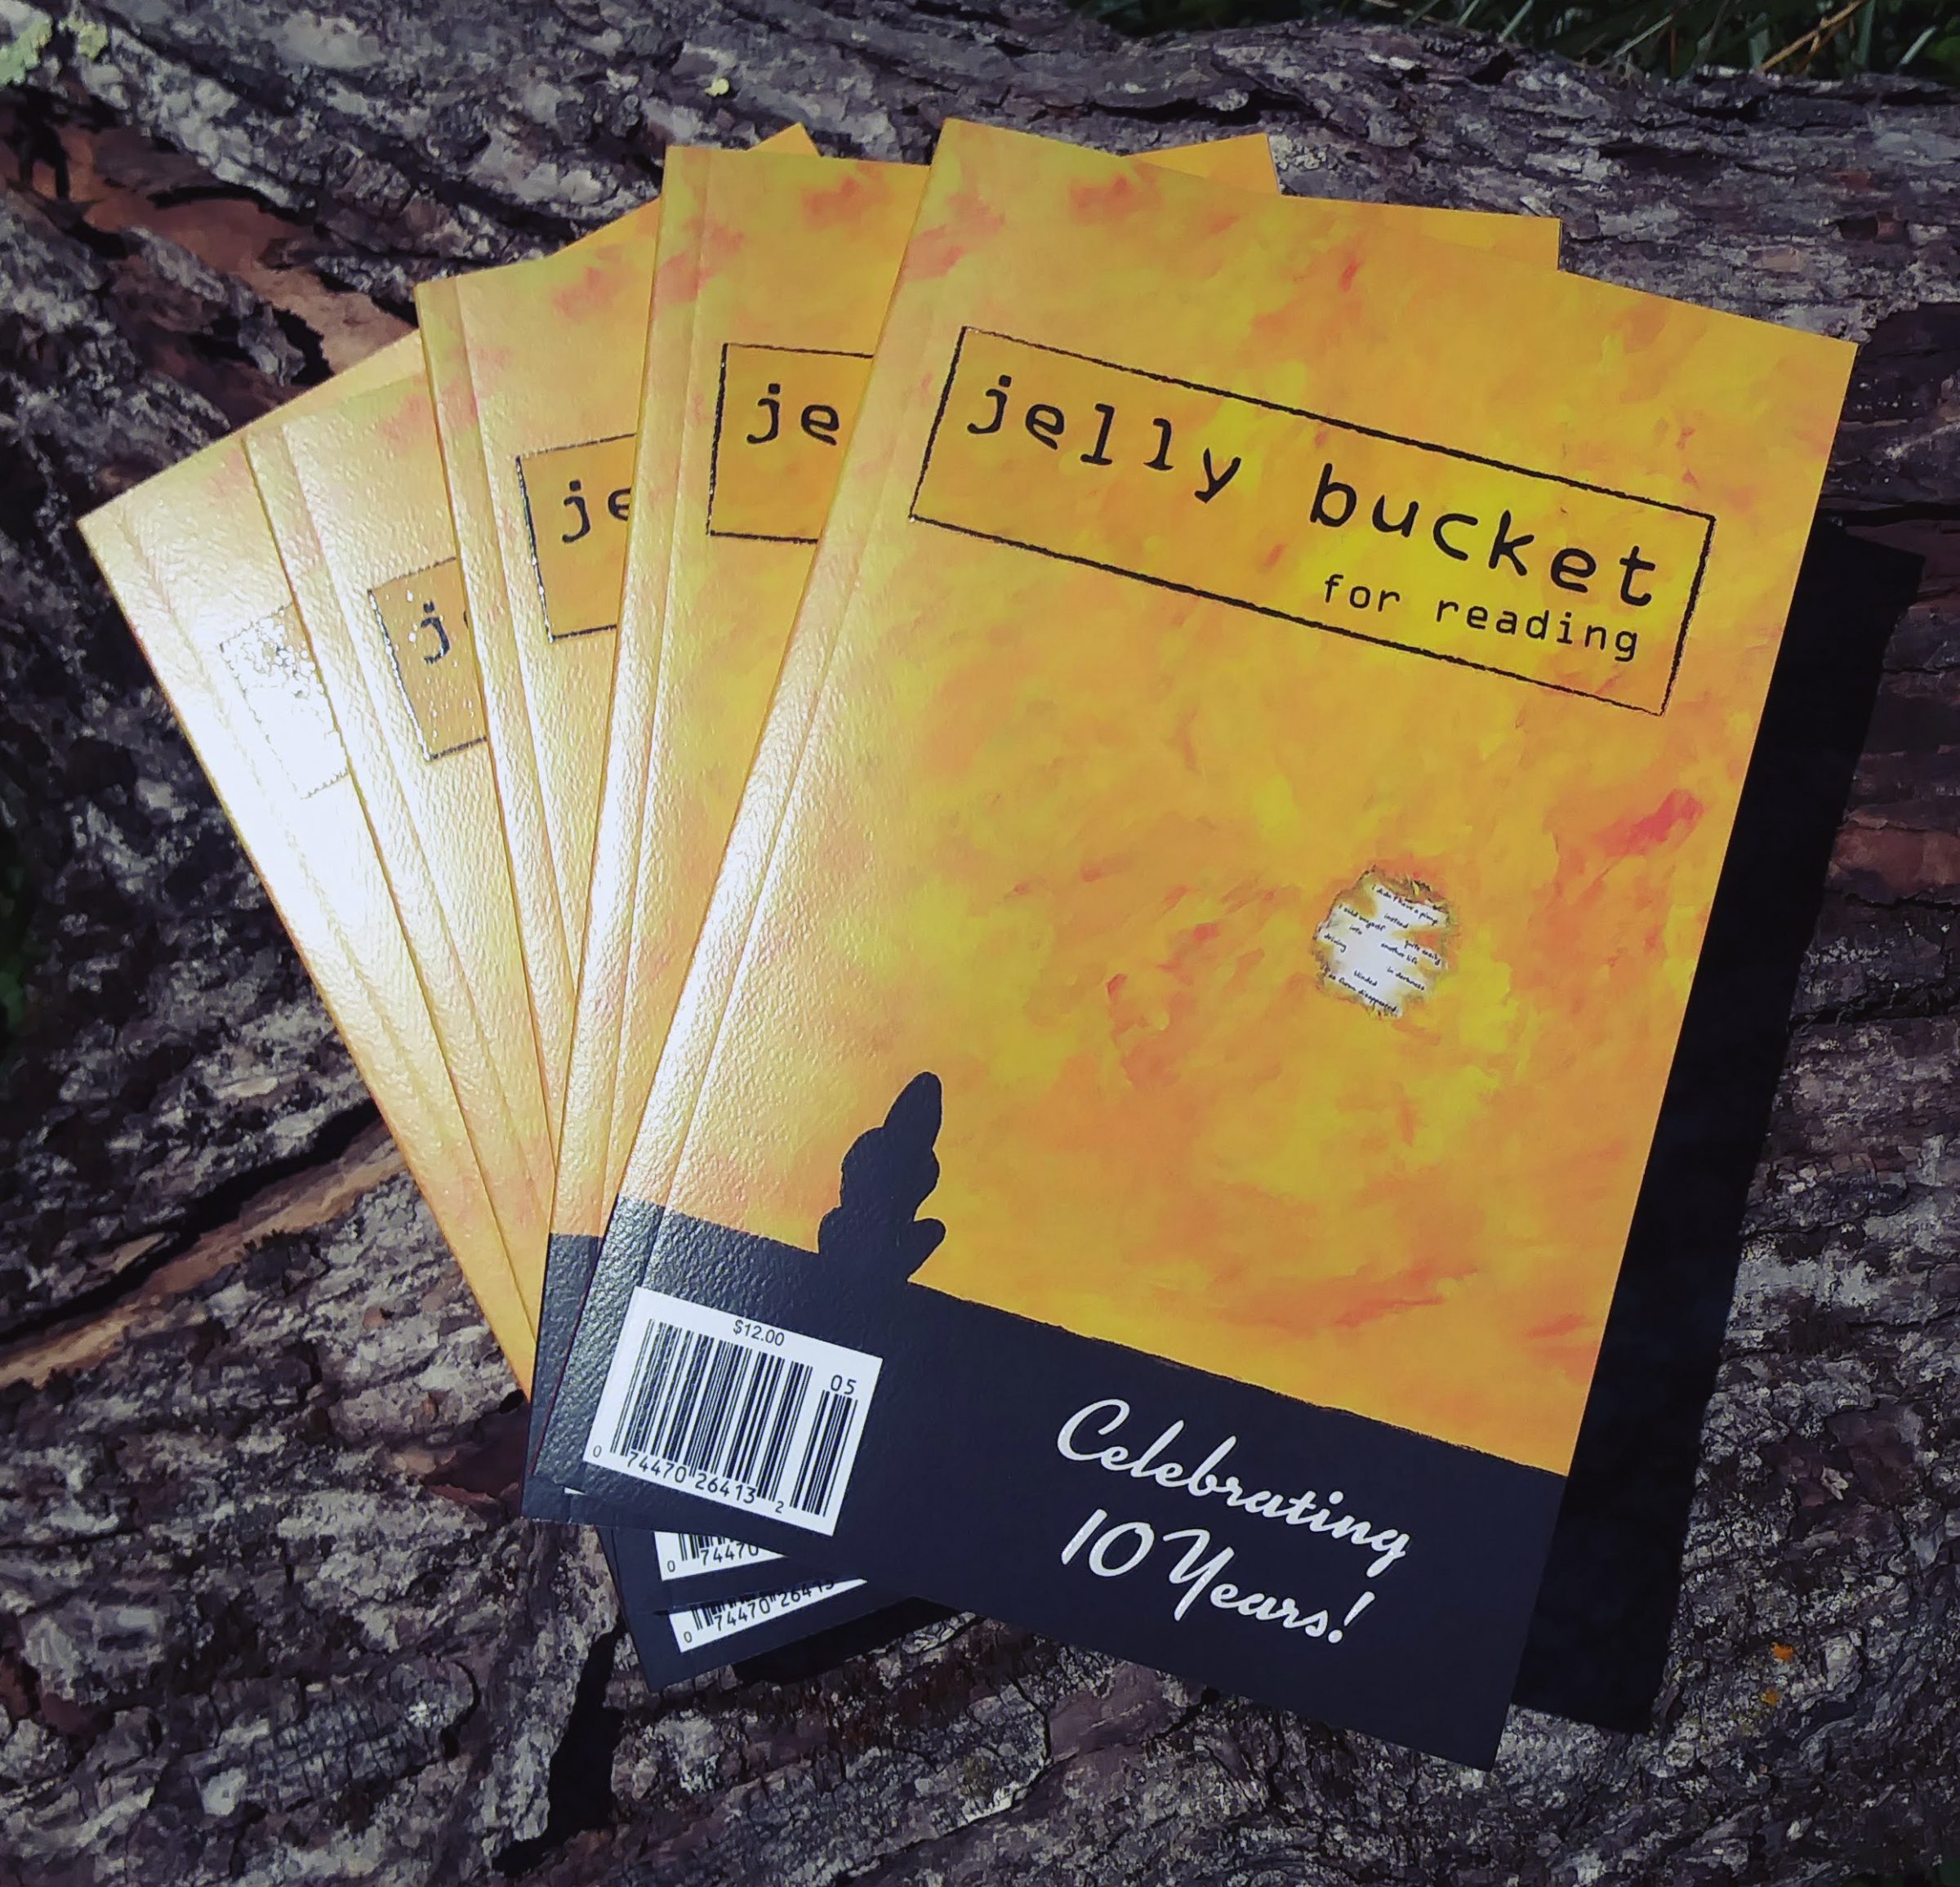 Issue 10 of Jelly Bucket